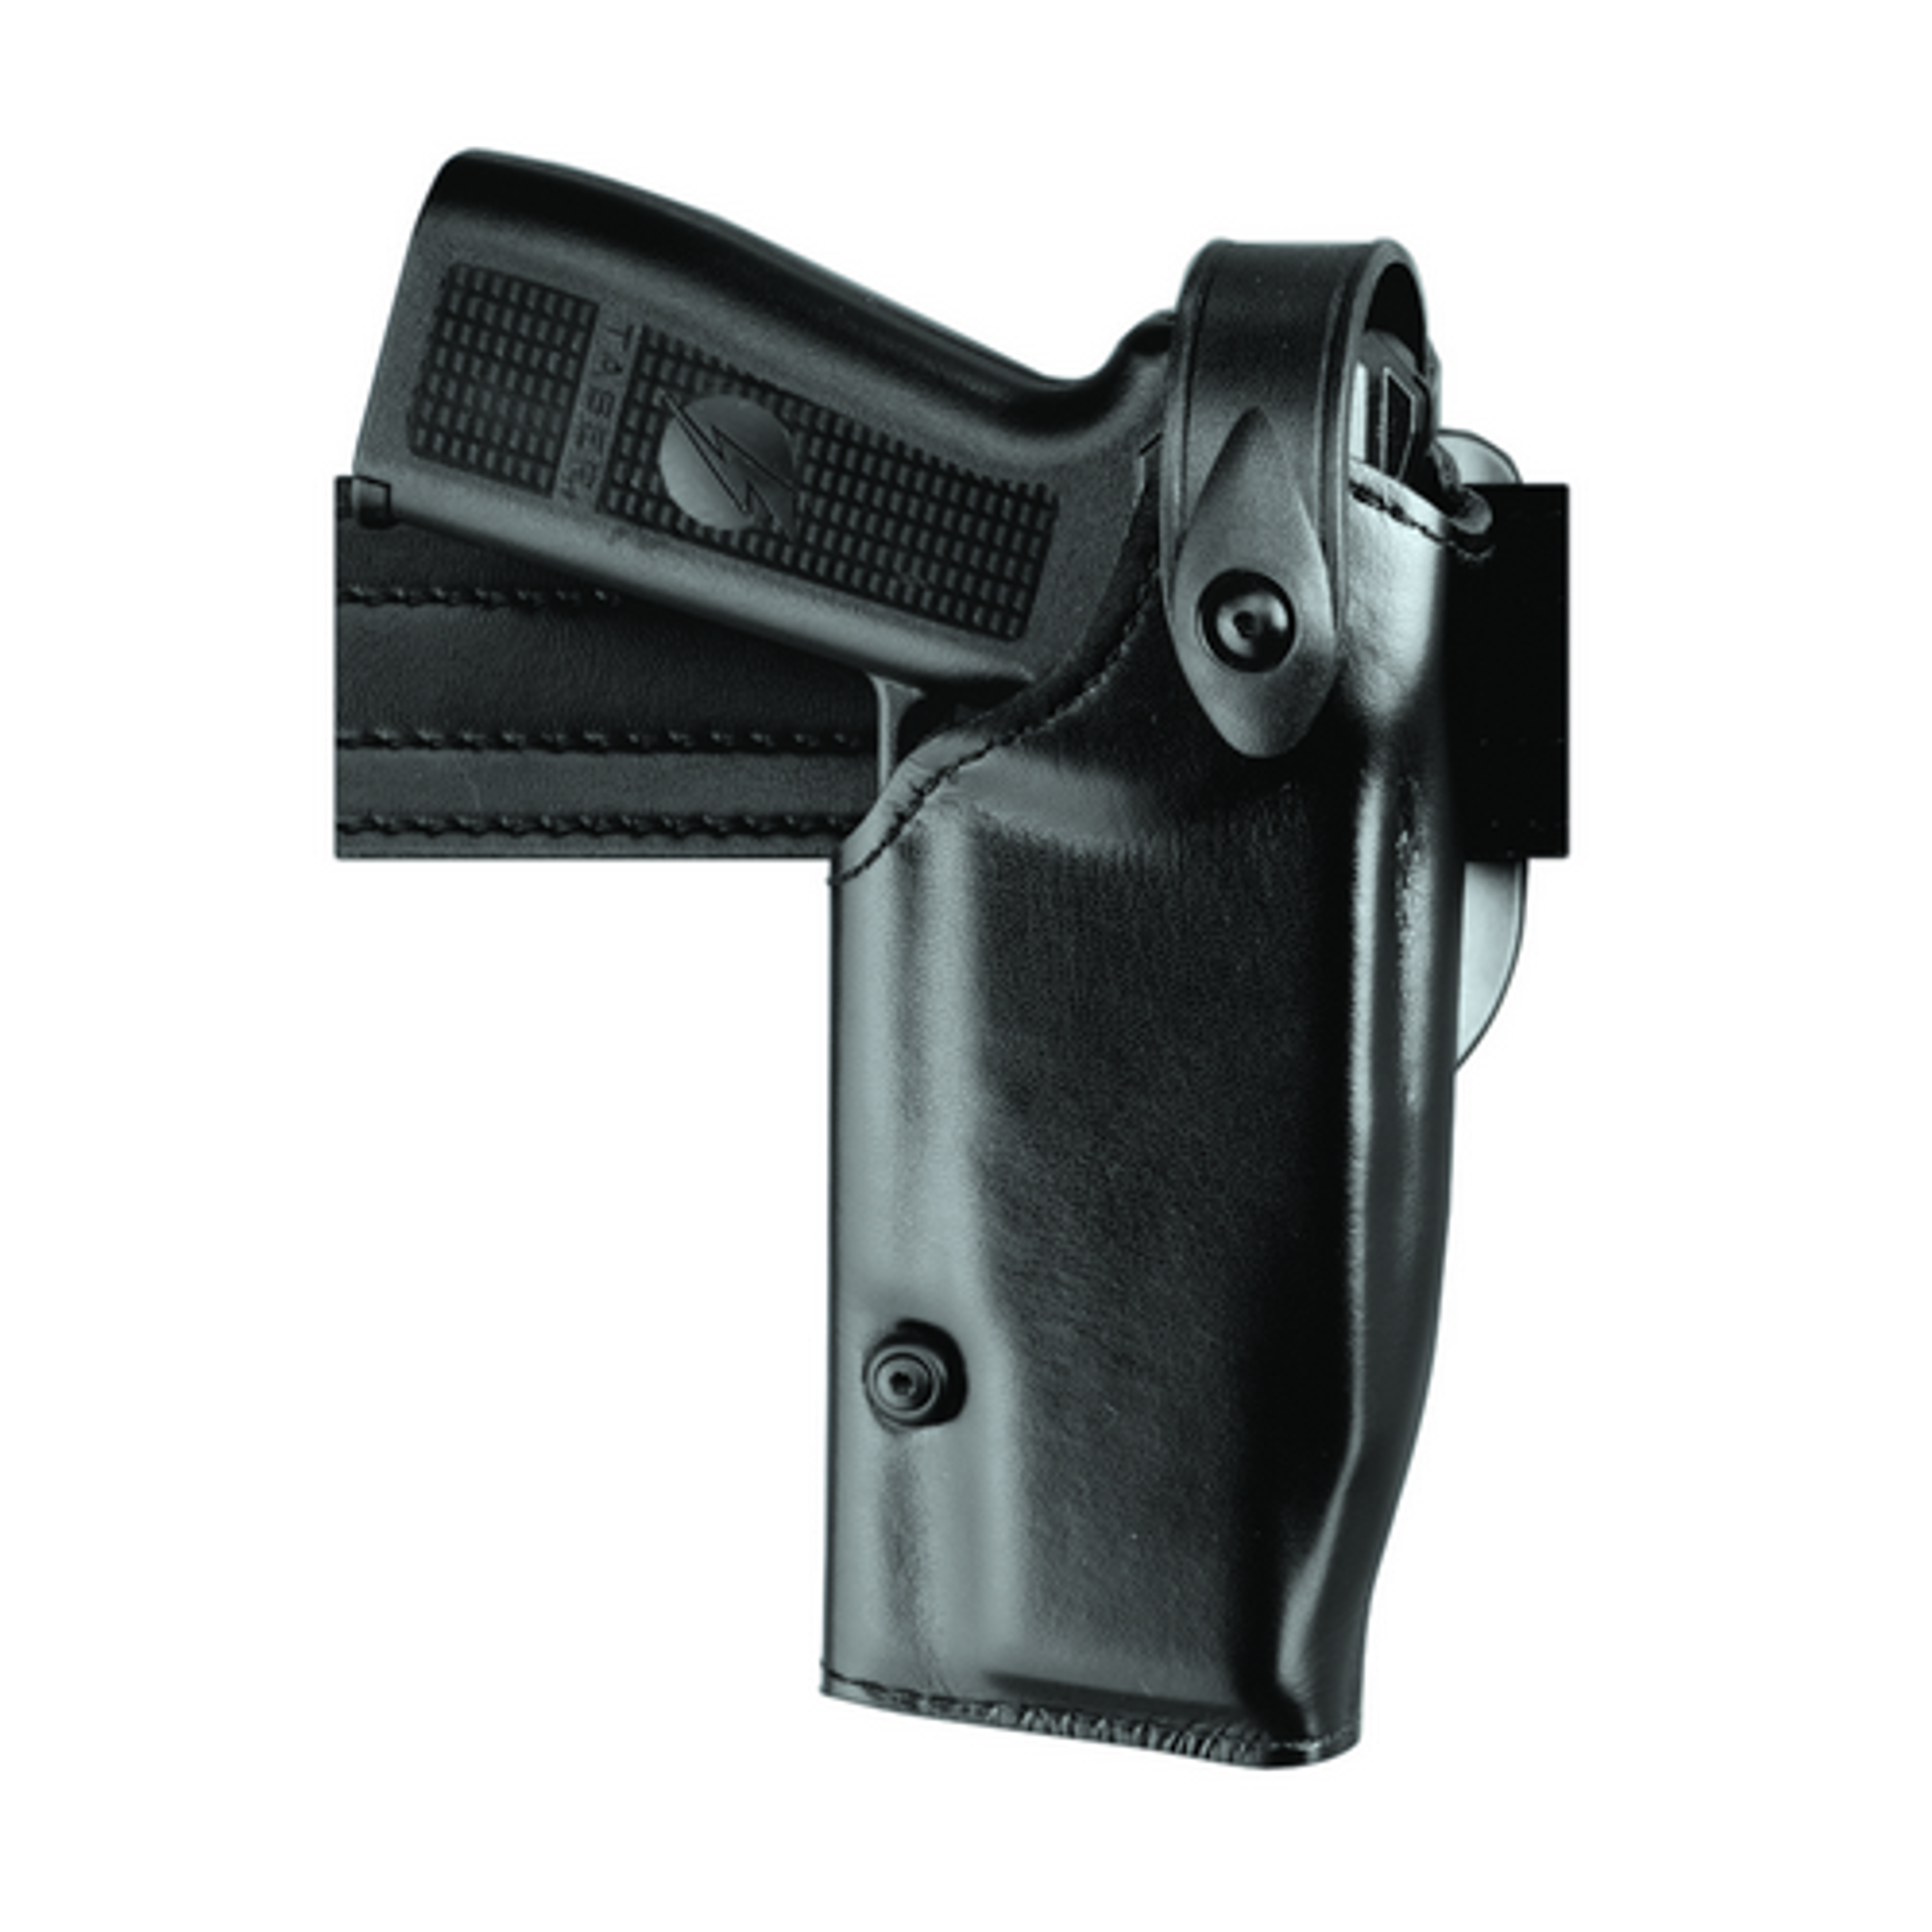 Model 6280 Sls Mid-ride Level Ii Retention Duty Holster For Sig Sauer P250 9